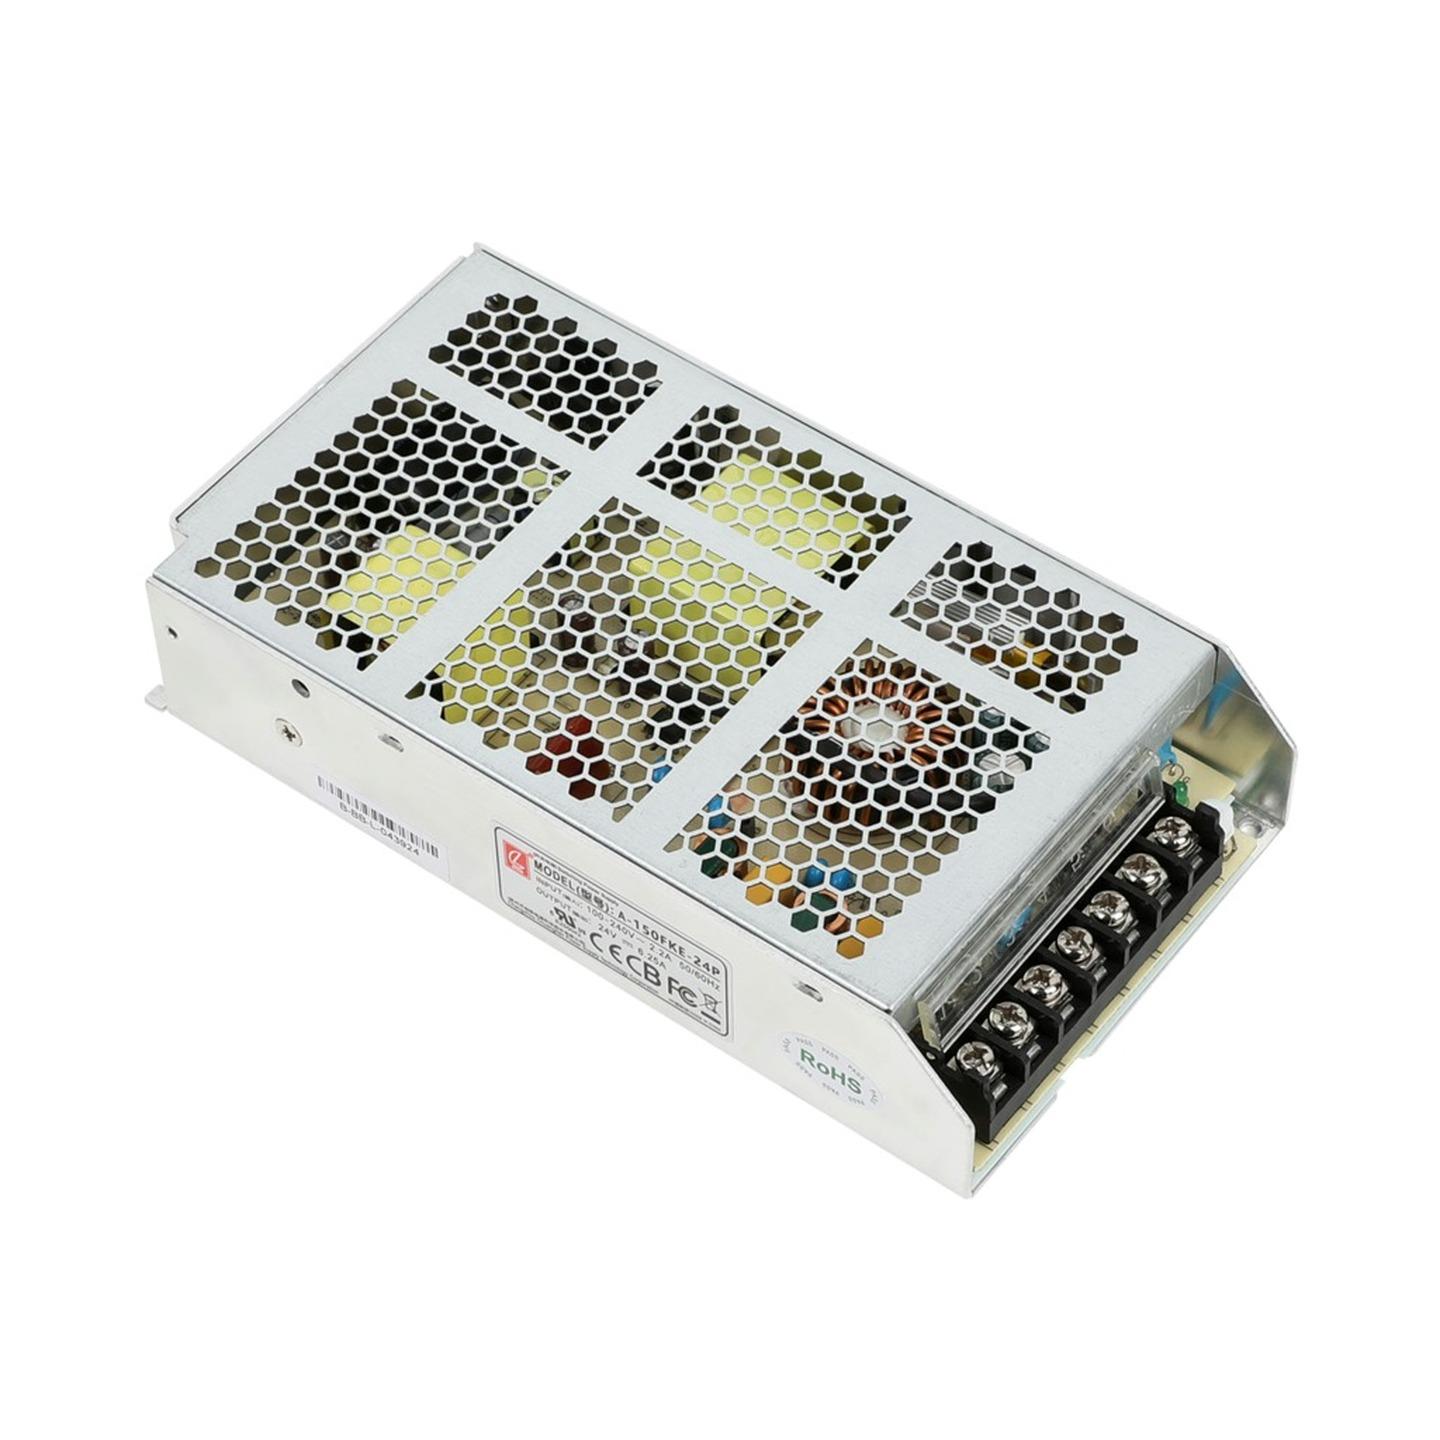 Replacement Power Supply for K1